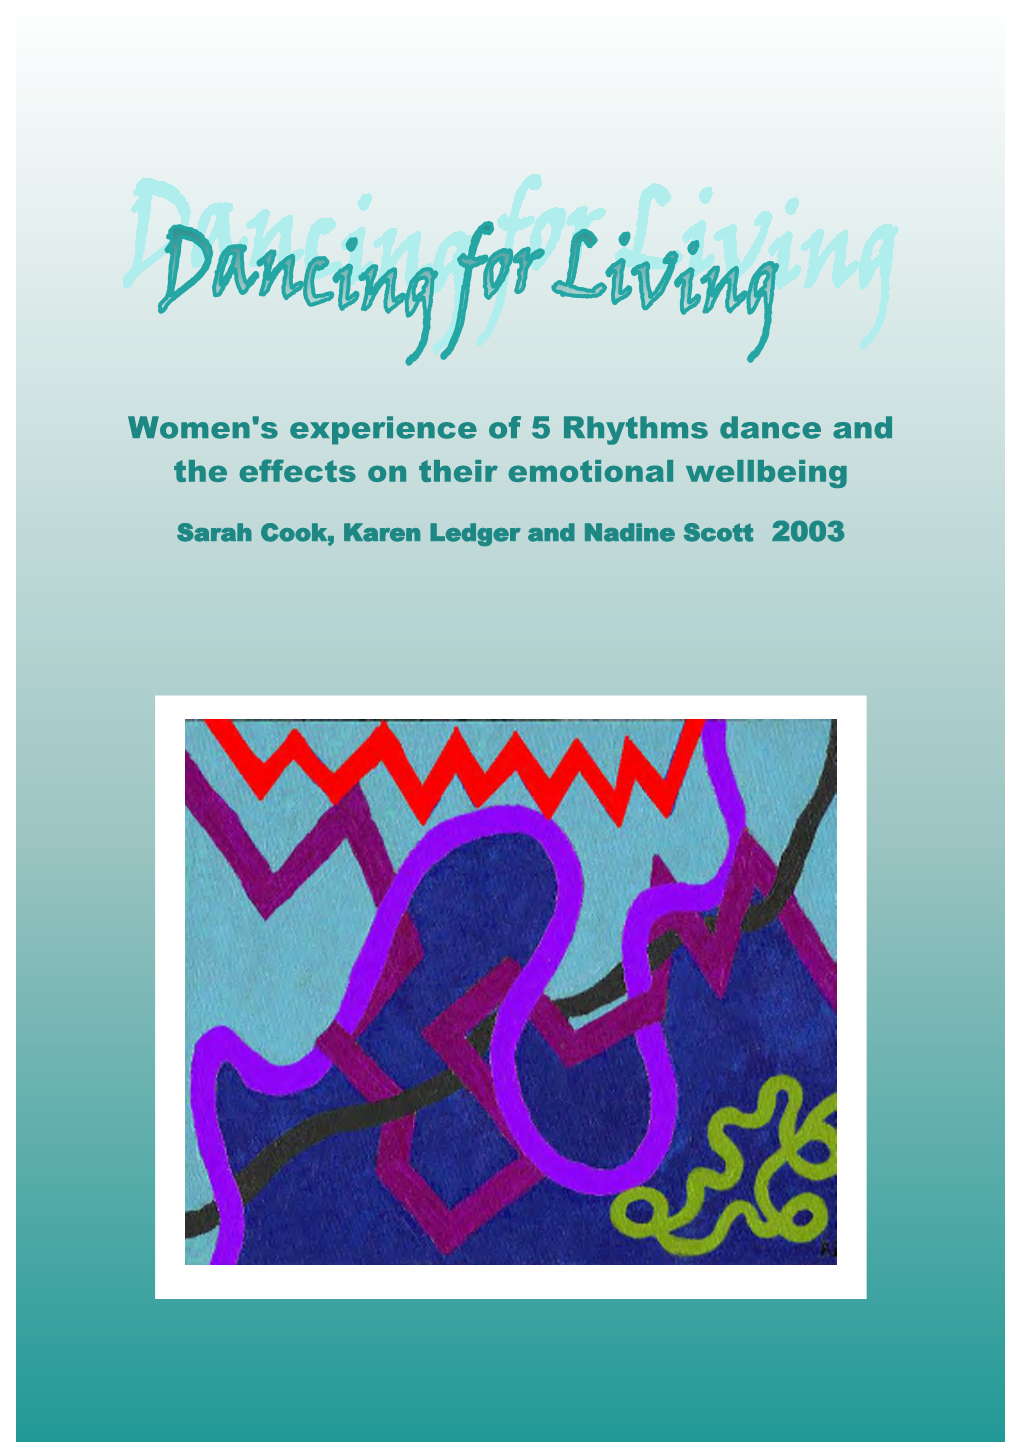 Women's Experience of 5 Rhythms Dance and the Effects on Their Emotional Wellbeing